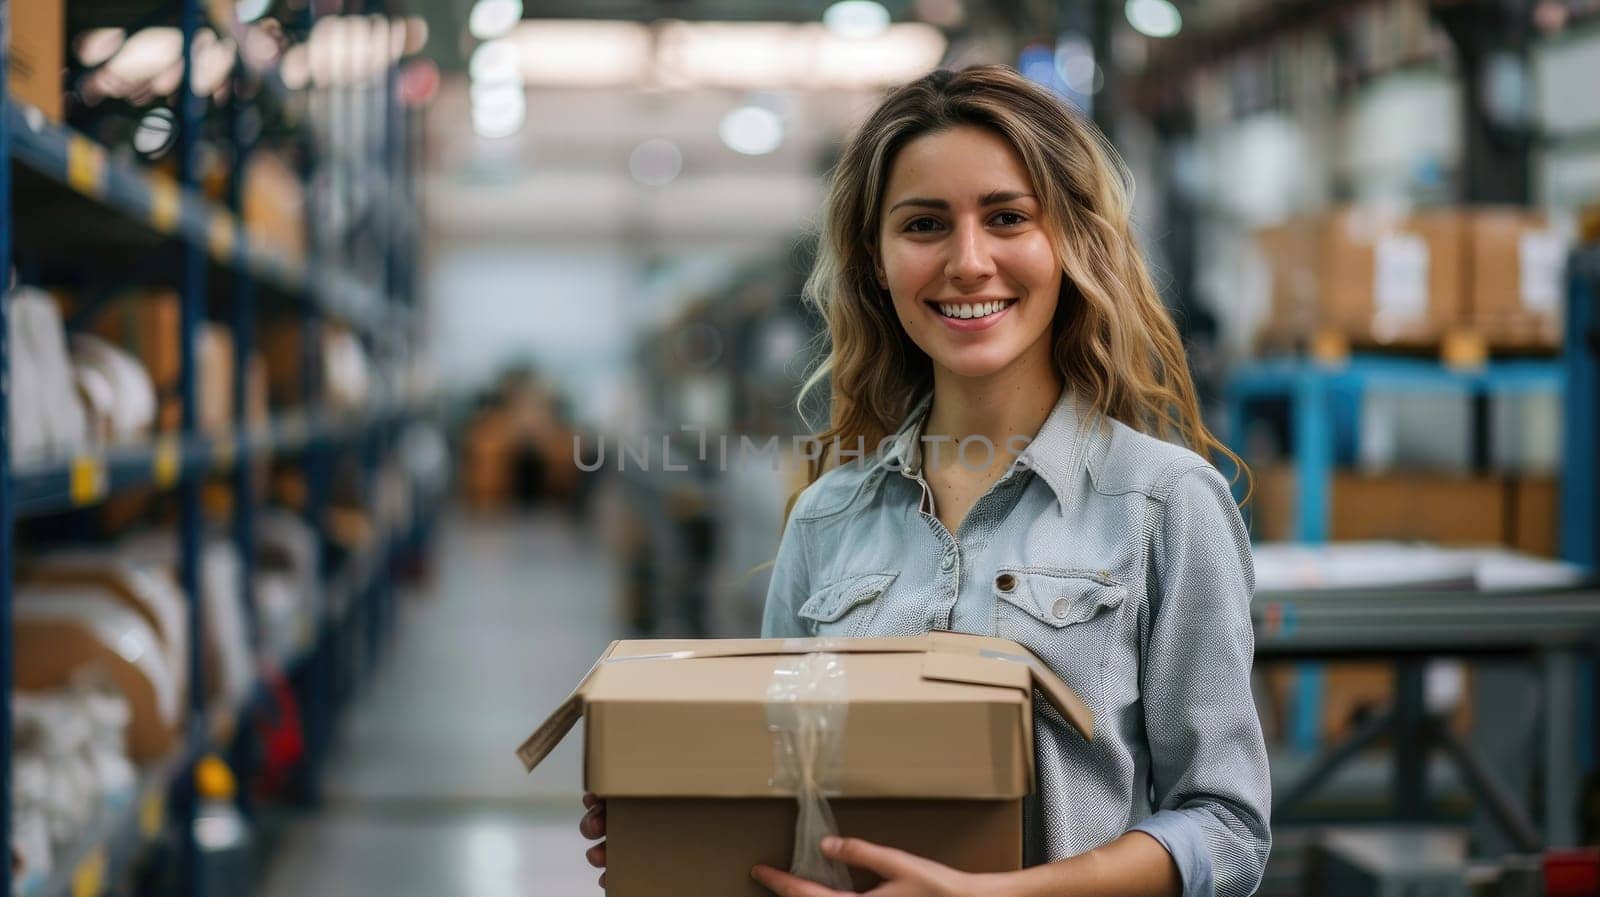 A professional businesswoman is holding a box inside a factory by nijieimu